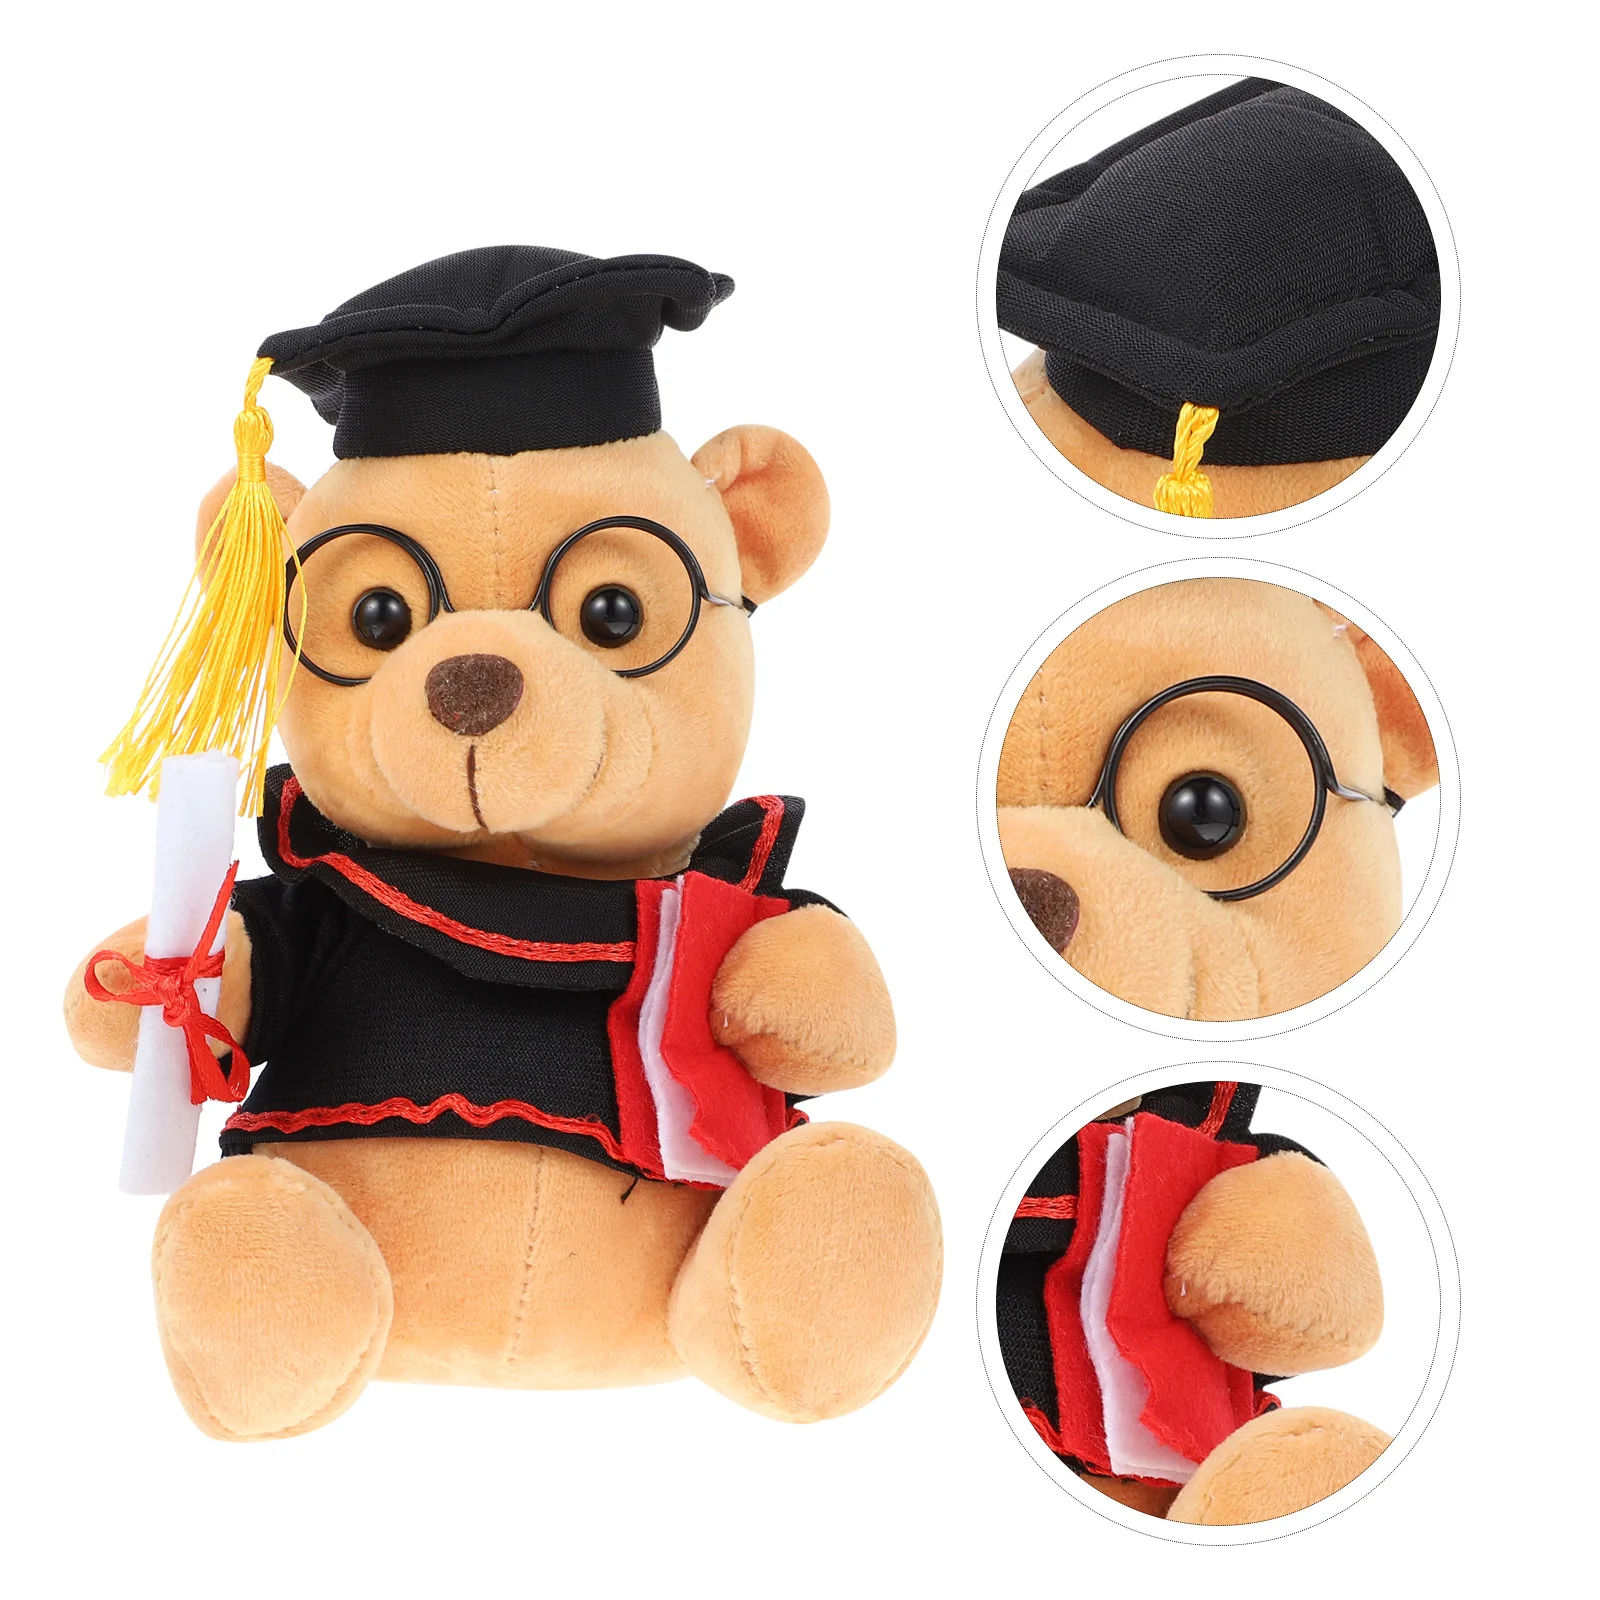 football children accessory adorable kids soccer supply function toy toys Graduation Plush Toy Kids Adorable Present Children Gift Bear Memorial Gifts